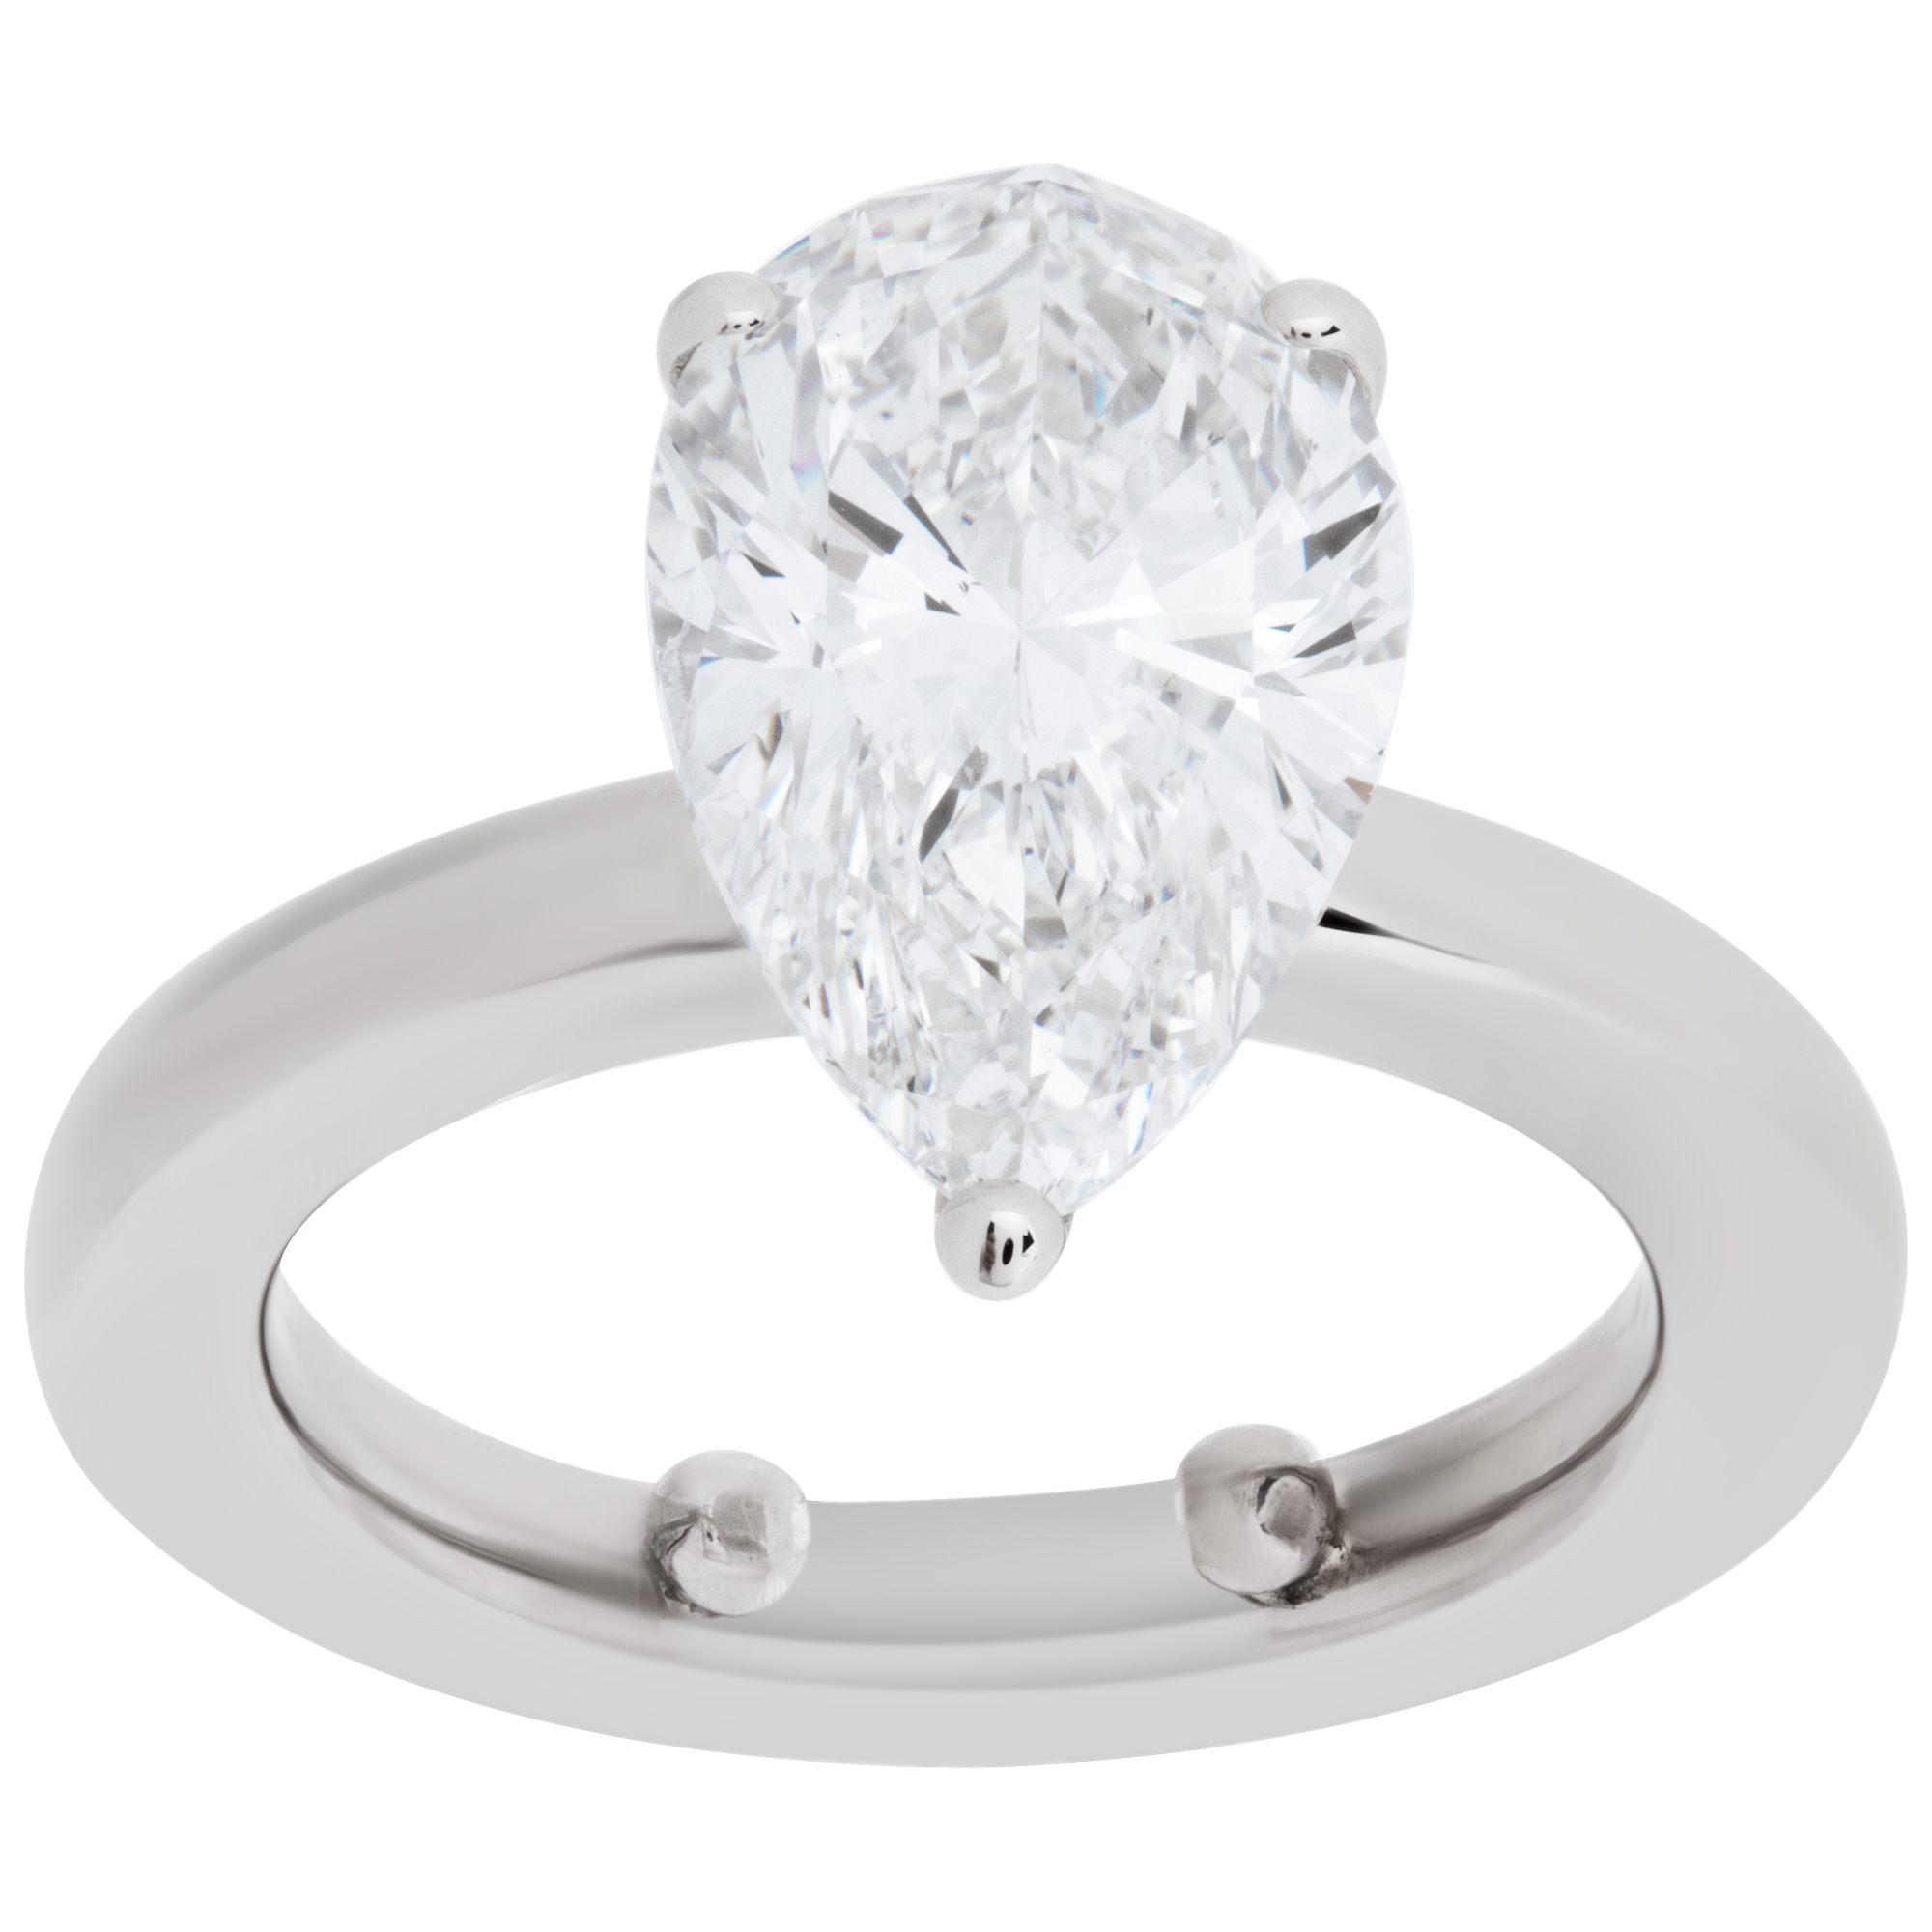 GIA certified pear shape 3.18 carat diamond (J color, SI2 clarity) ring set in platinum